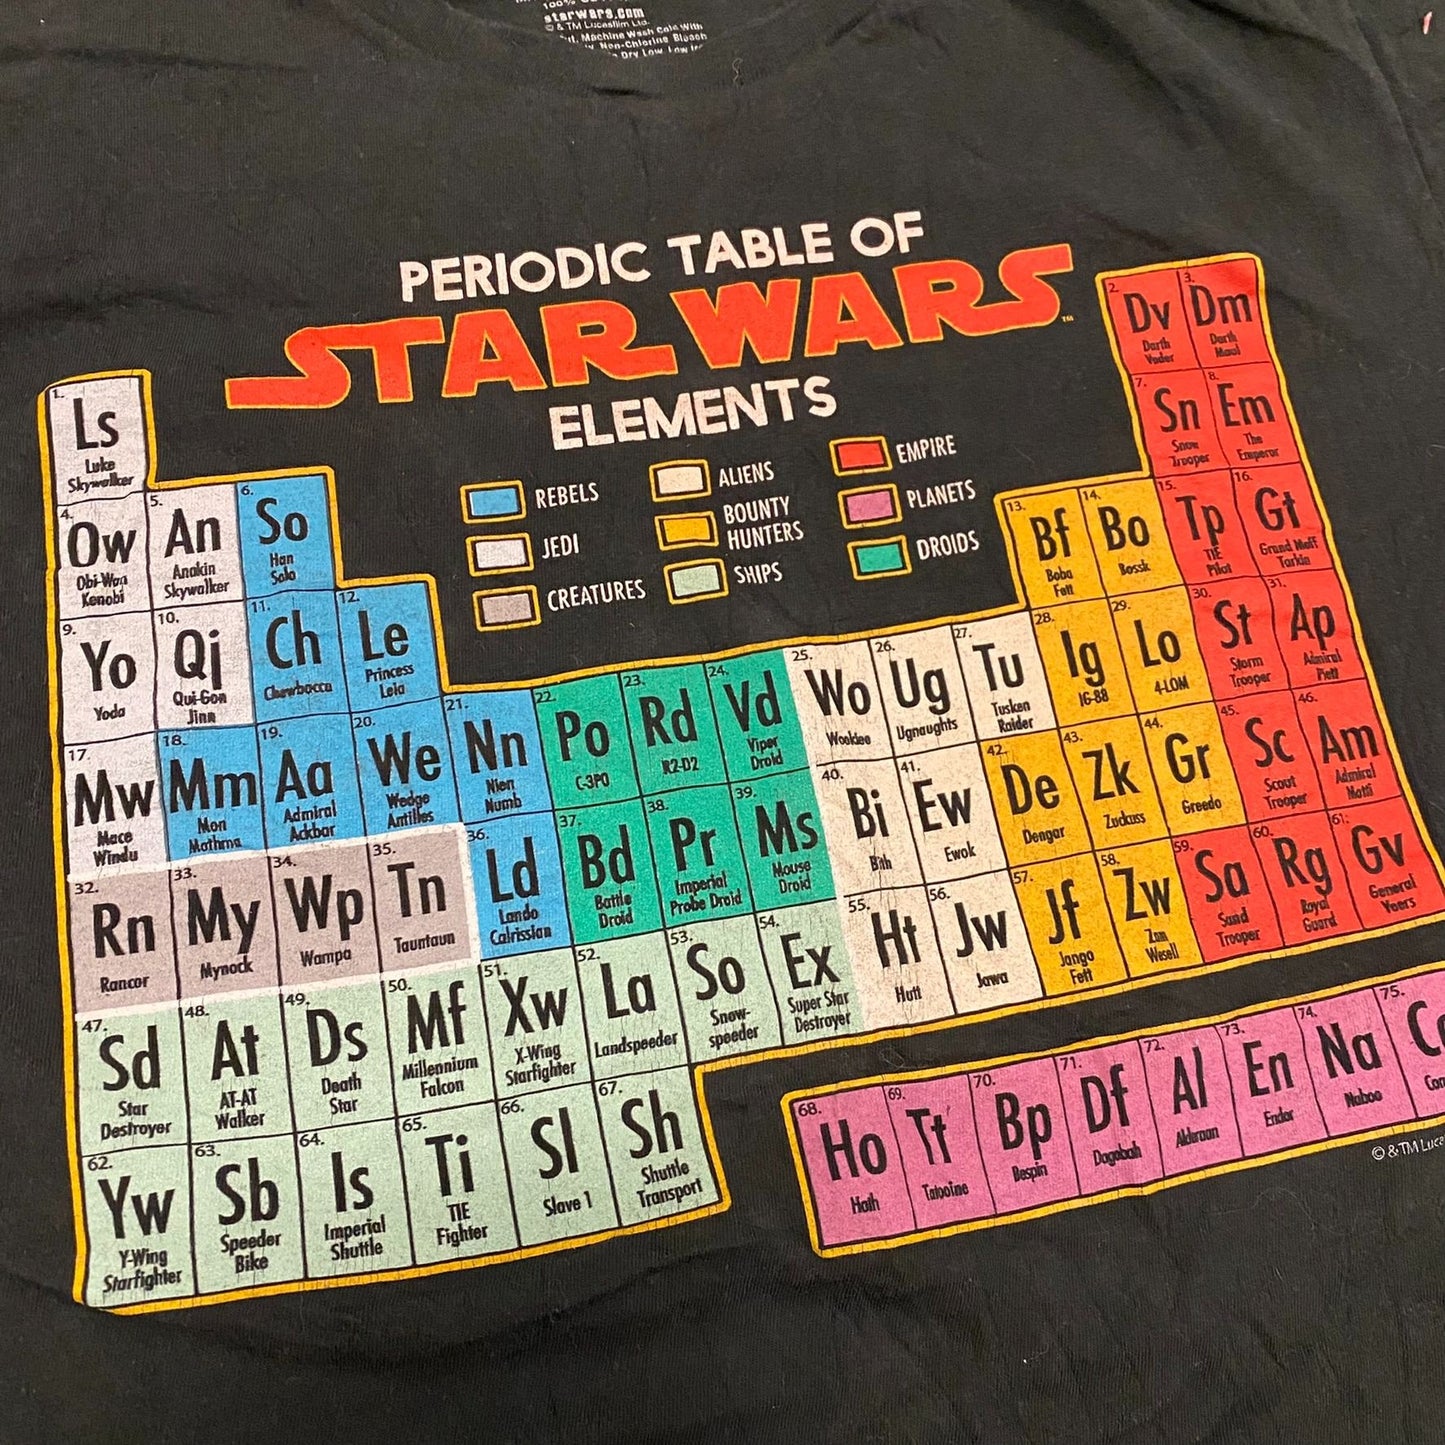 Star Wars Periodic Table Vintage T-Shirt